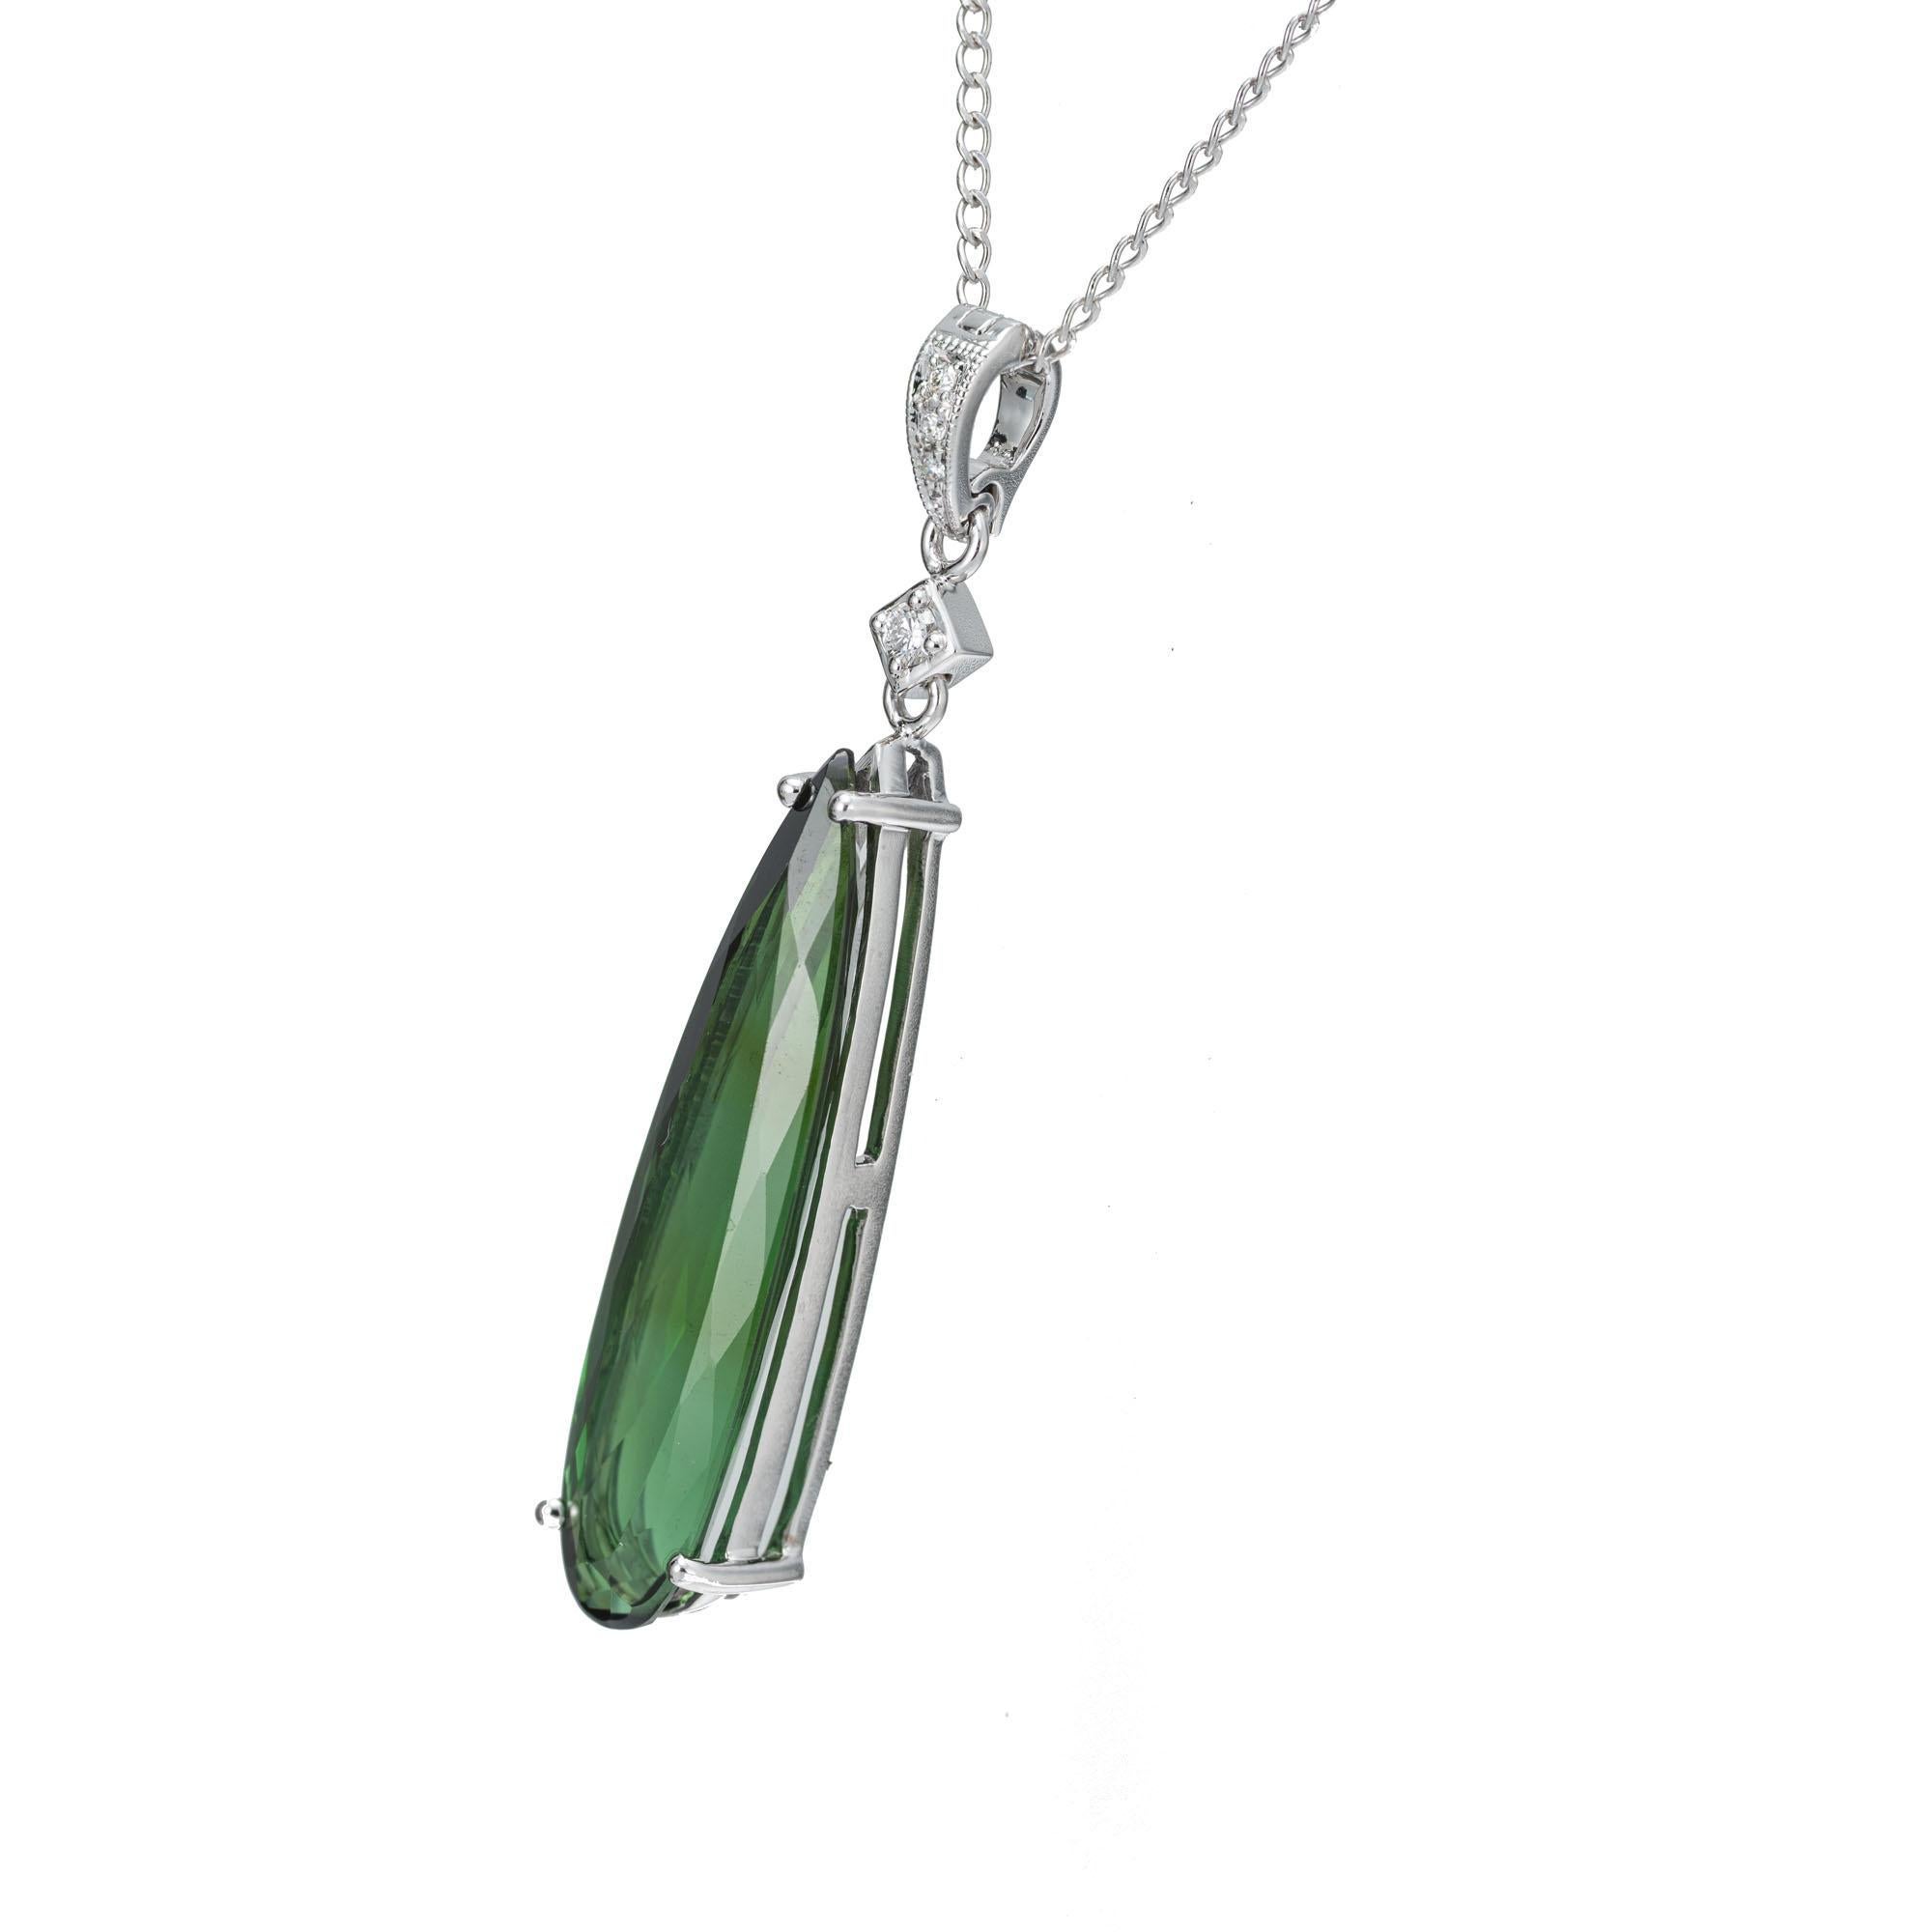 Green elongated pear shape tourmaline in a simple 14k white gold pendant setting with four diamond accents and an enhancer bail. 16 inch long chain. Designed and crafted in the Peter Suchy workshop. 

1 elongated pear shape green tourmaline, VS